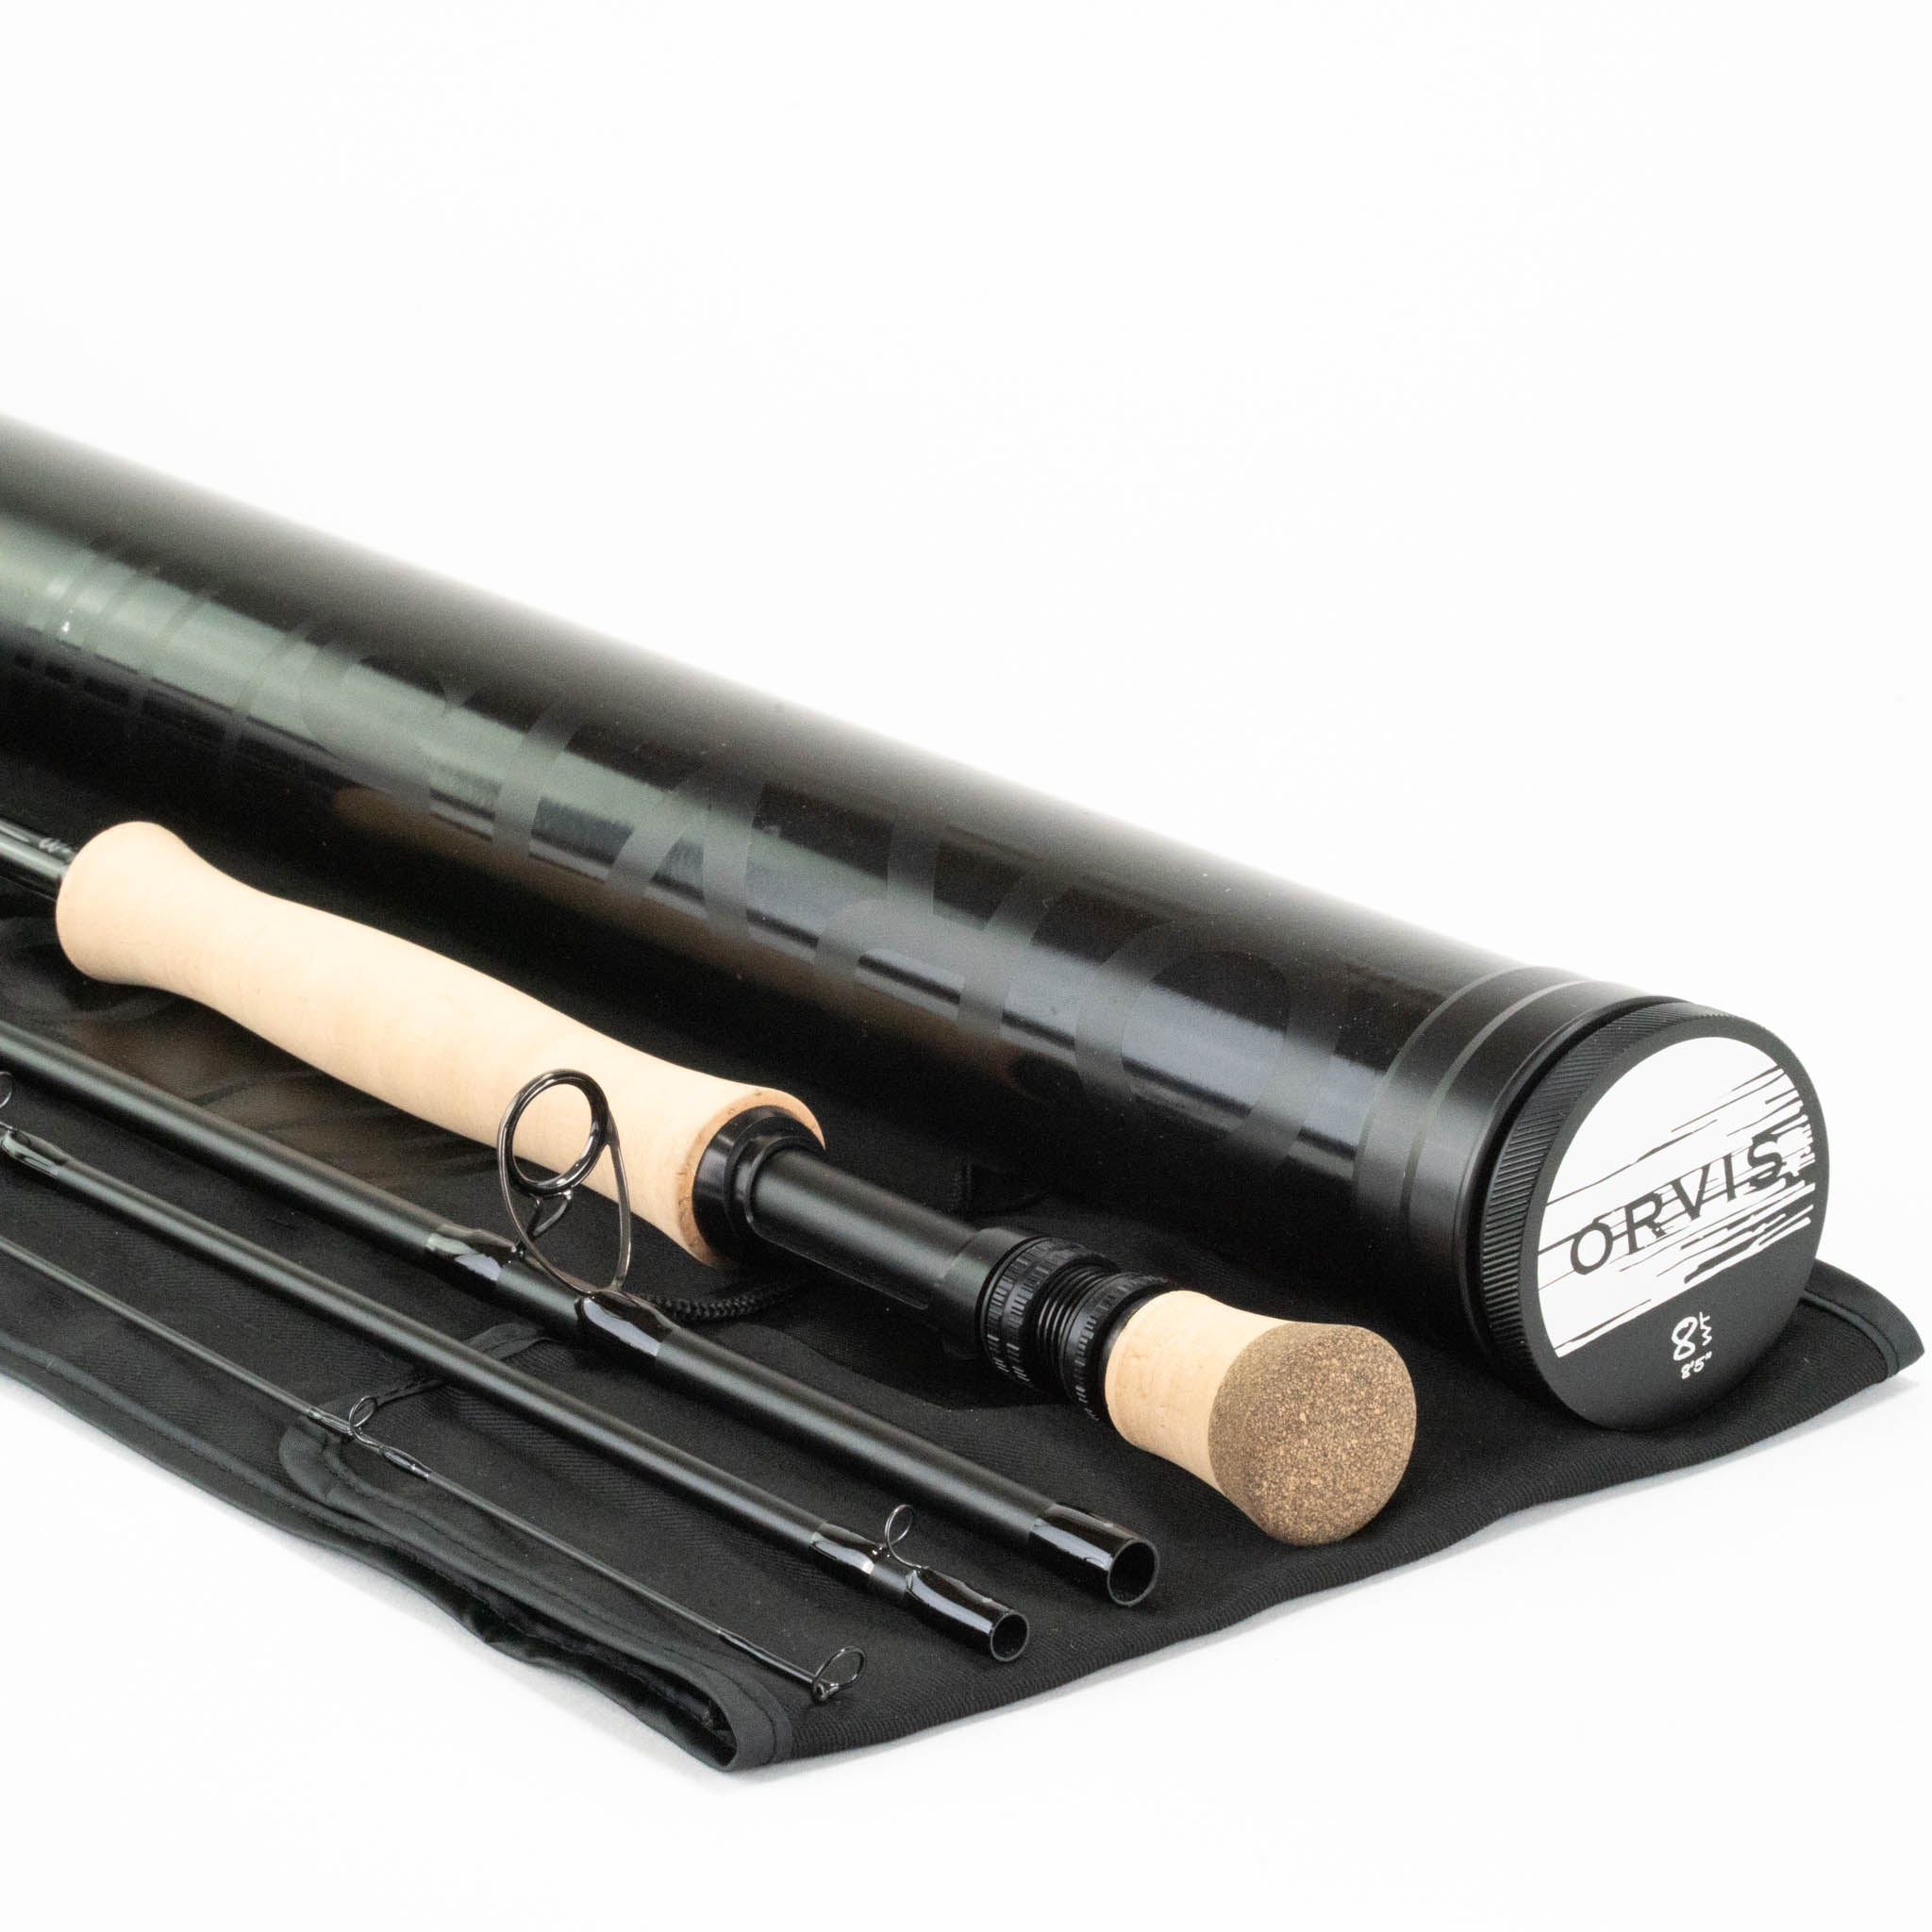 Orvis Helios 3D Blackout 885-4 Fly Rod - 8wt 8ft 5in 4pc – Outfishers